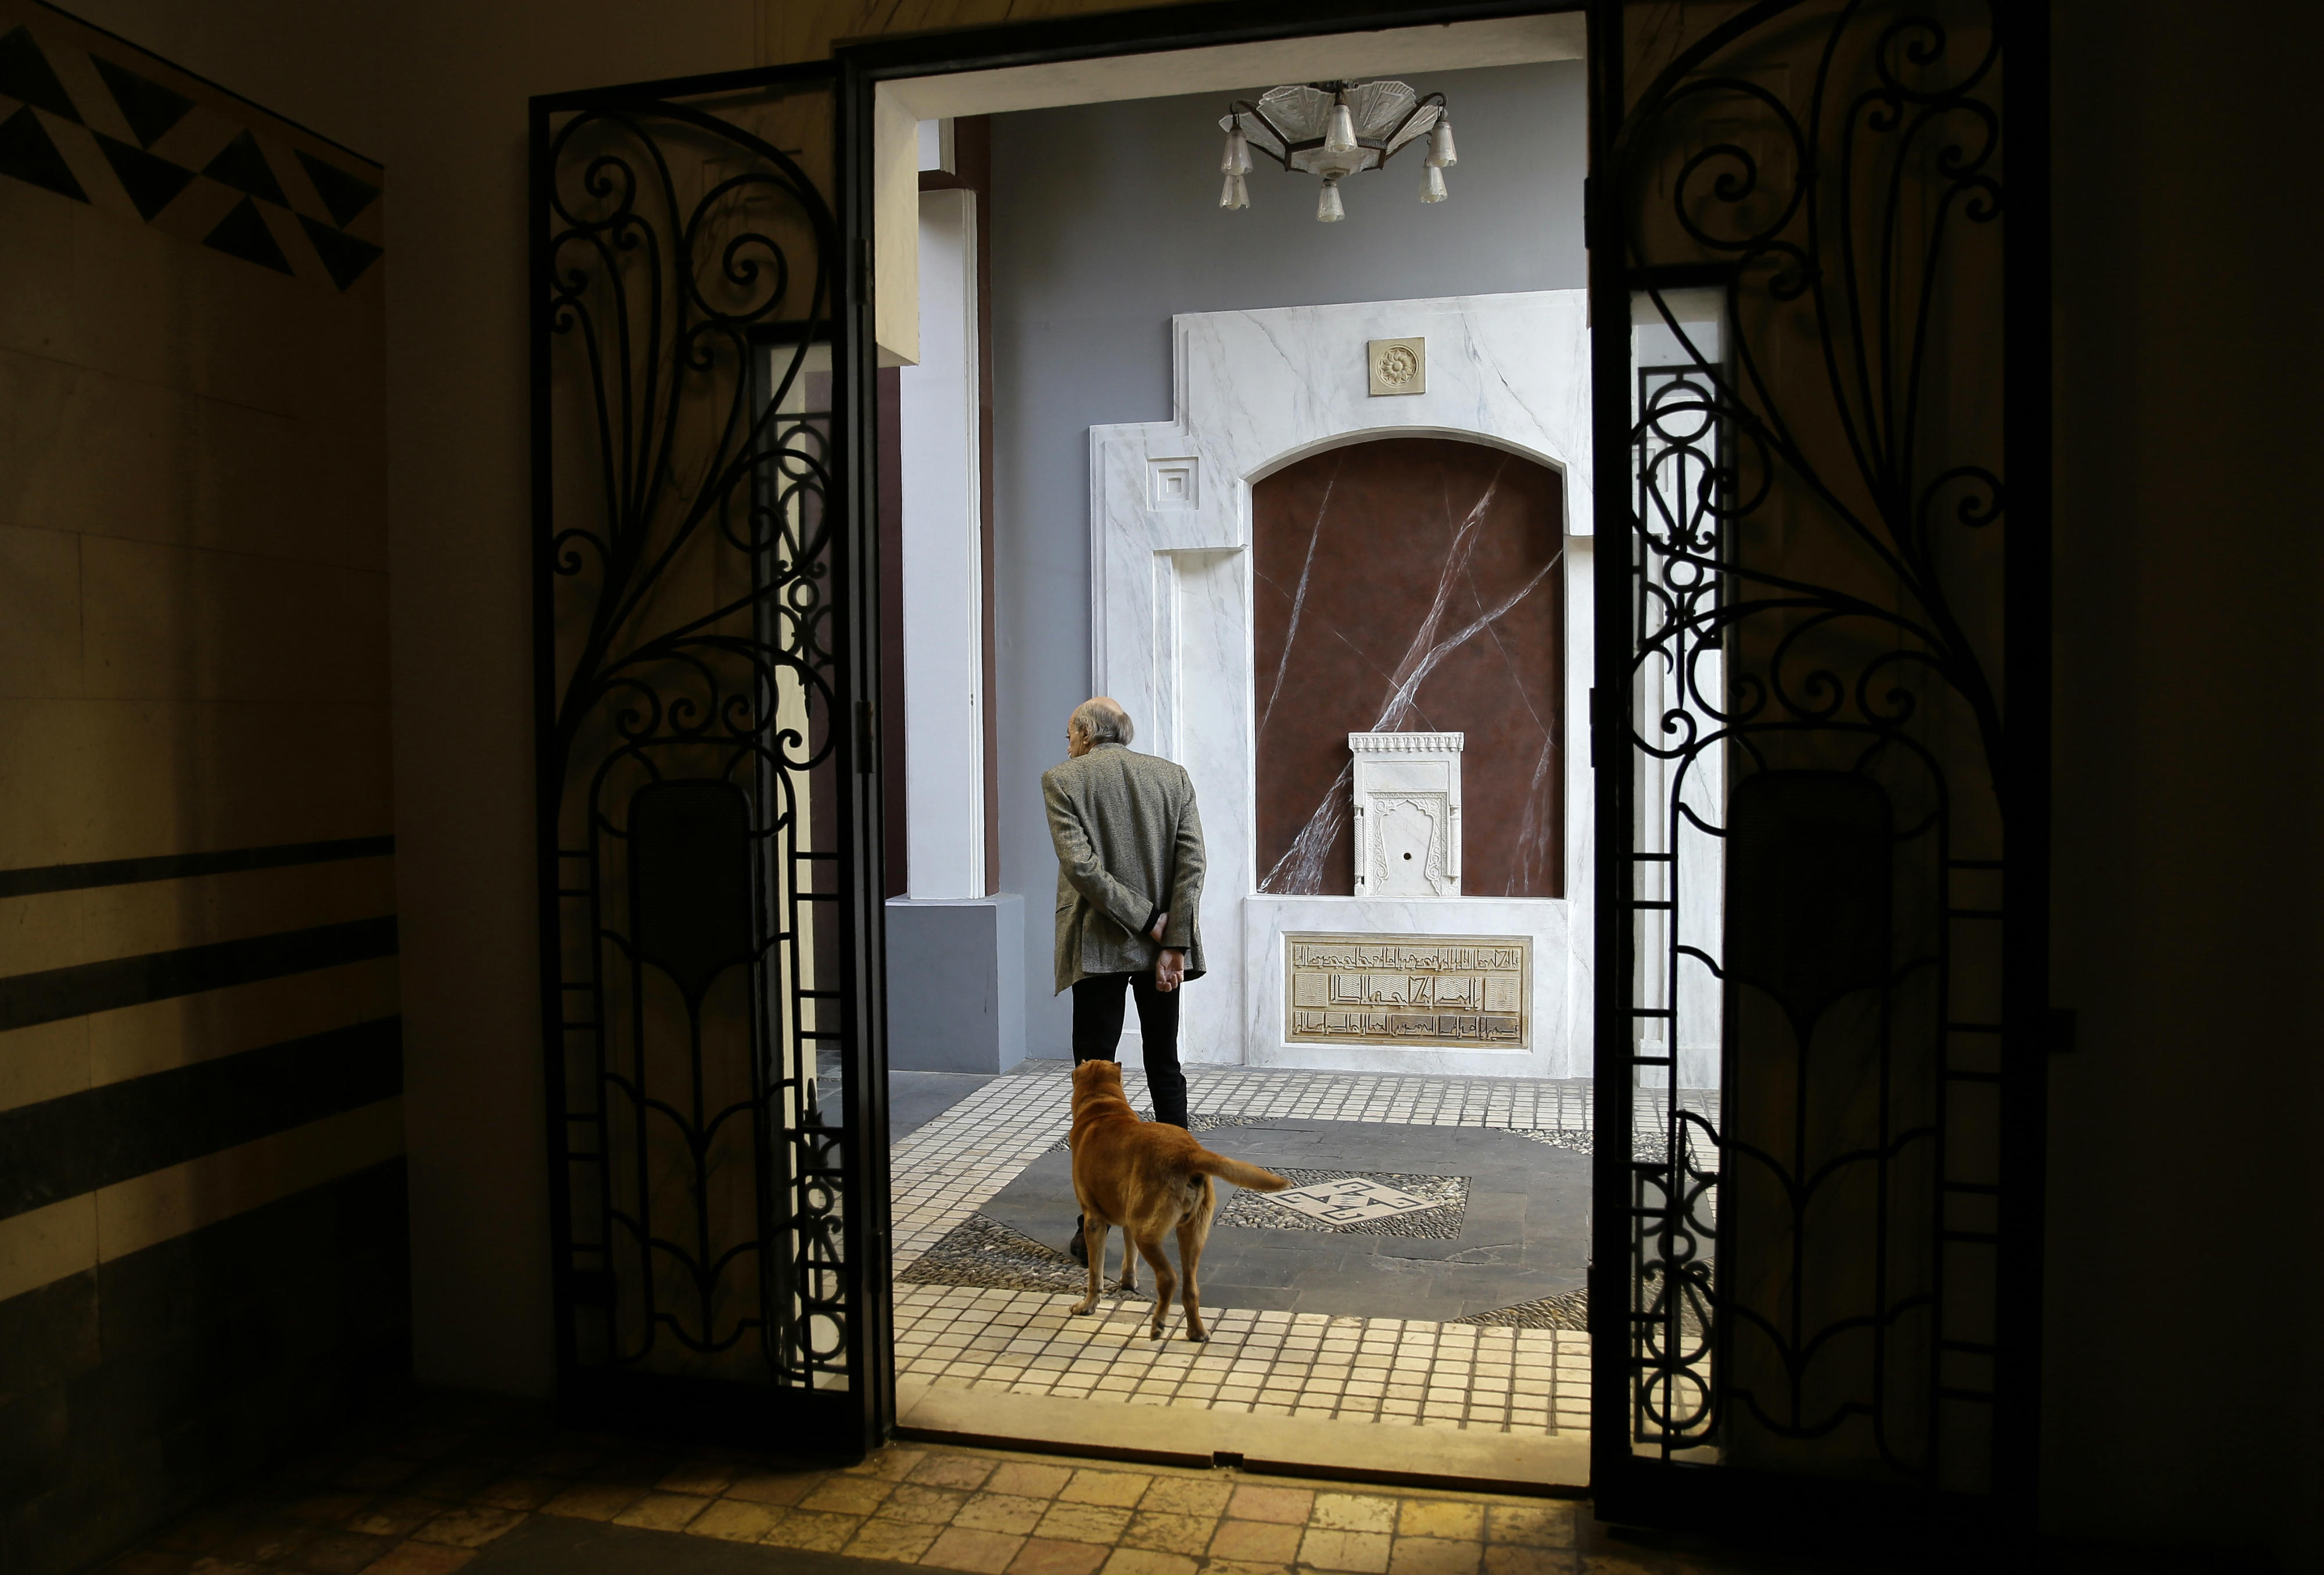 Lebanese Druze leader Walid Joumblatt walks with his Shar-Pei dog Oscar at his house in Beirut's Clemenceau street (AFP)